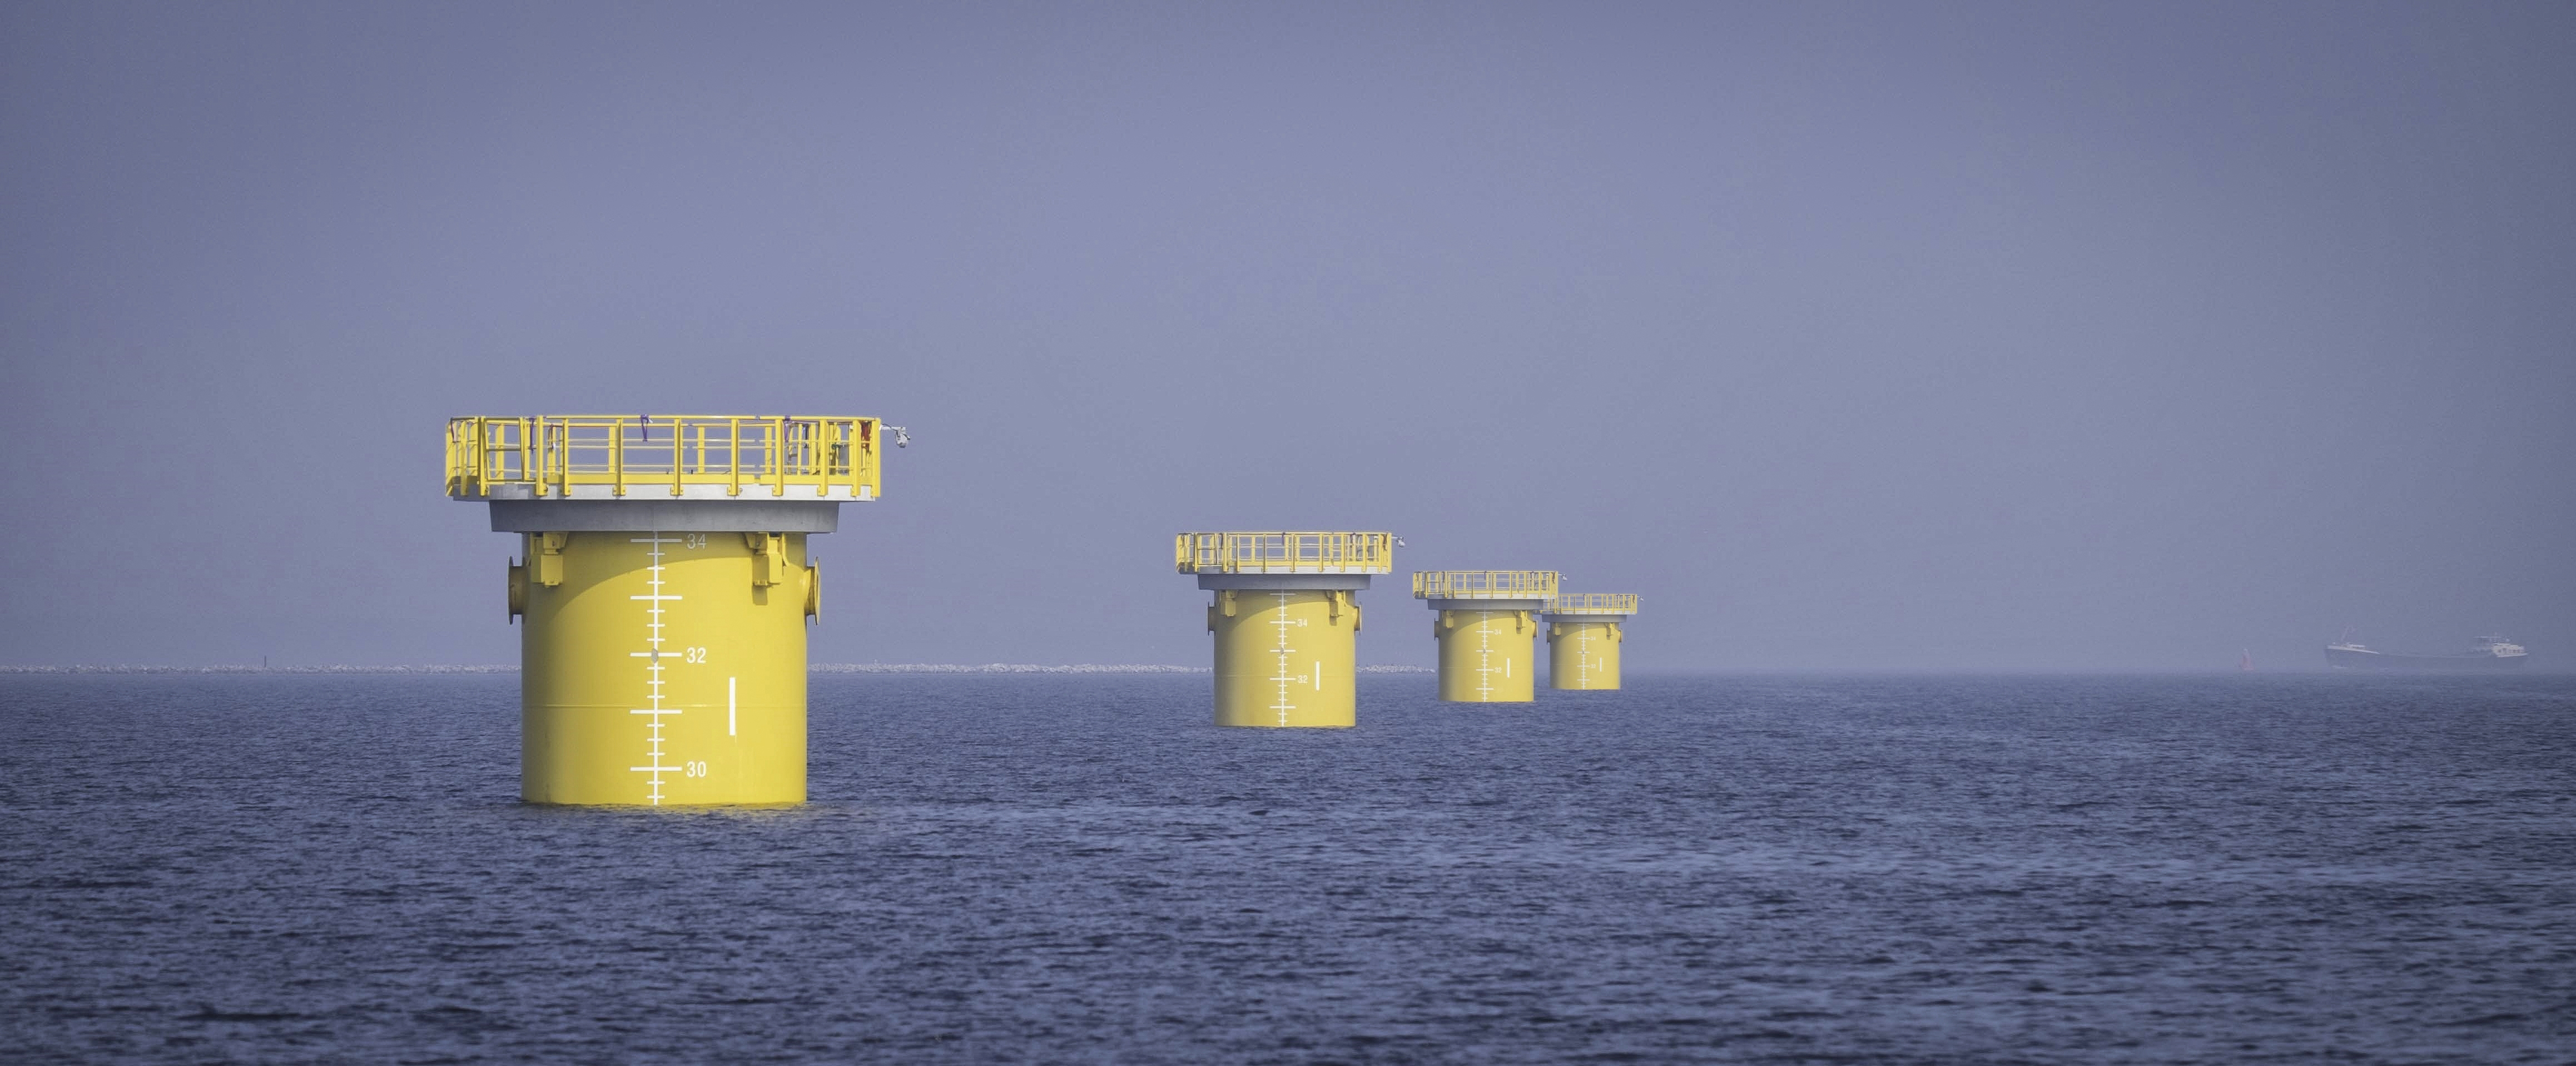 Last foundation pile installed for Westermeerwind nearshore wind farm